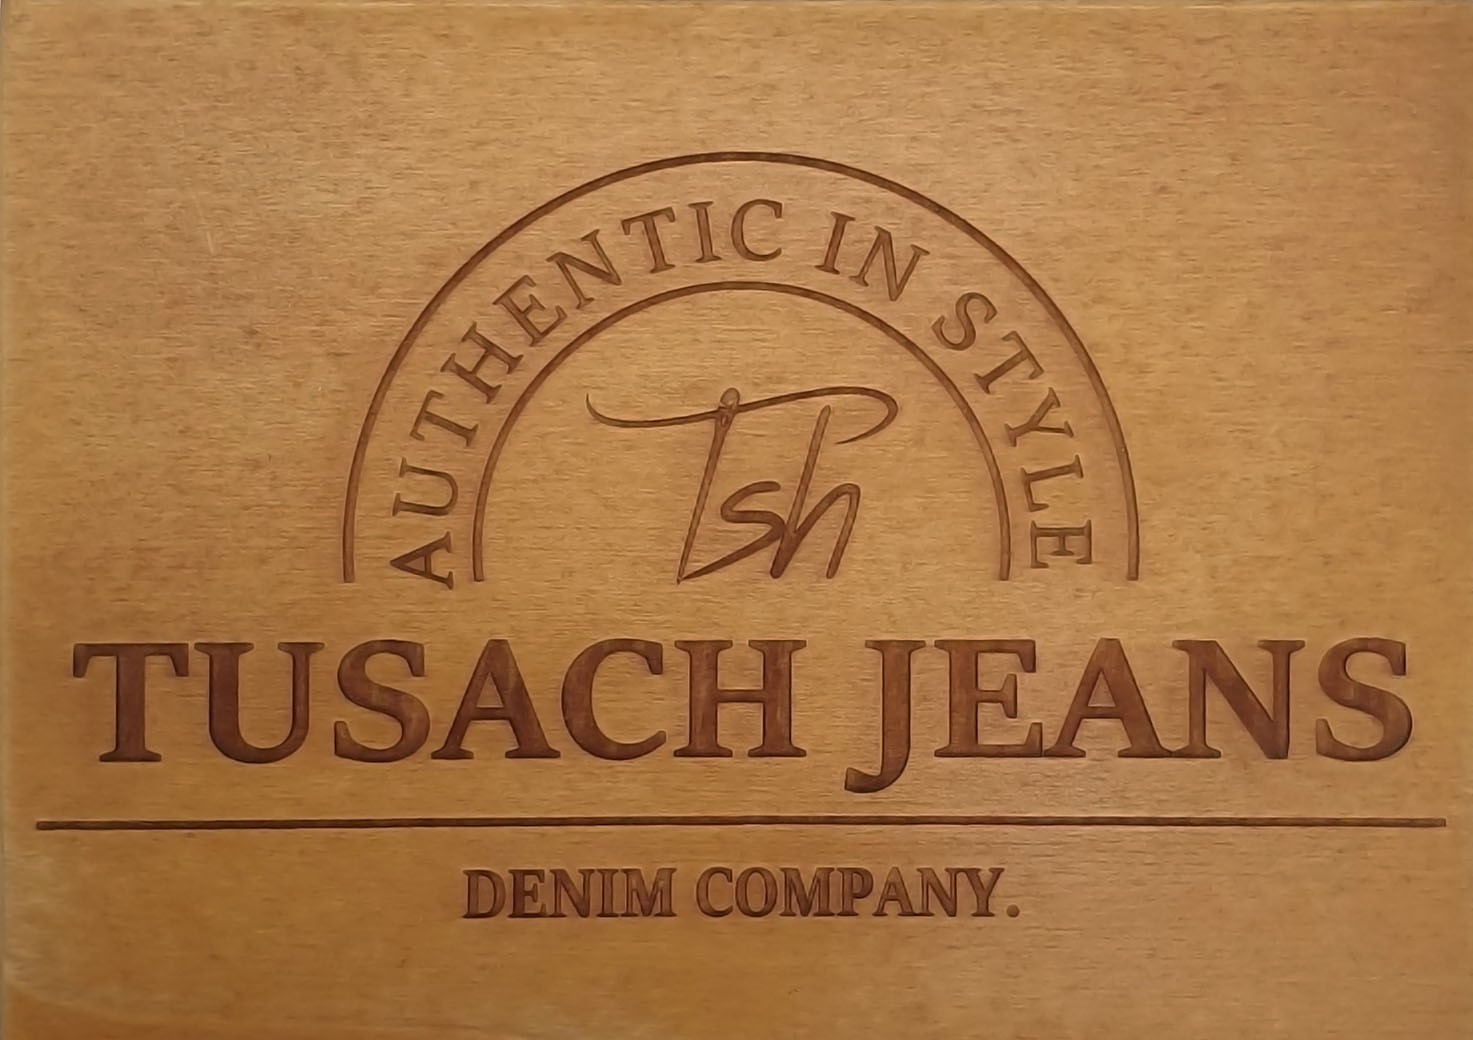 Tusach Jeans